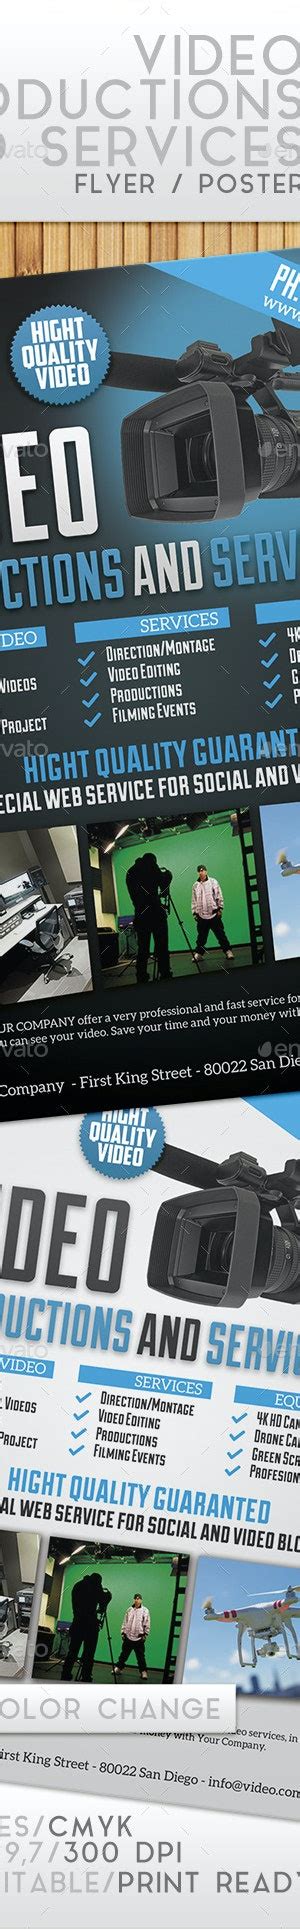 Video Production And Services Flyerposter By Giunina Graphicriver